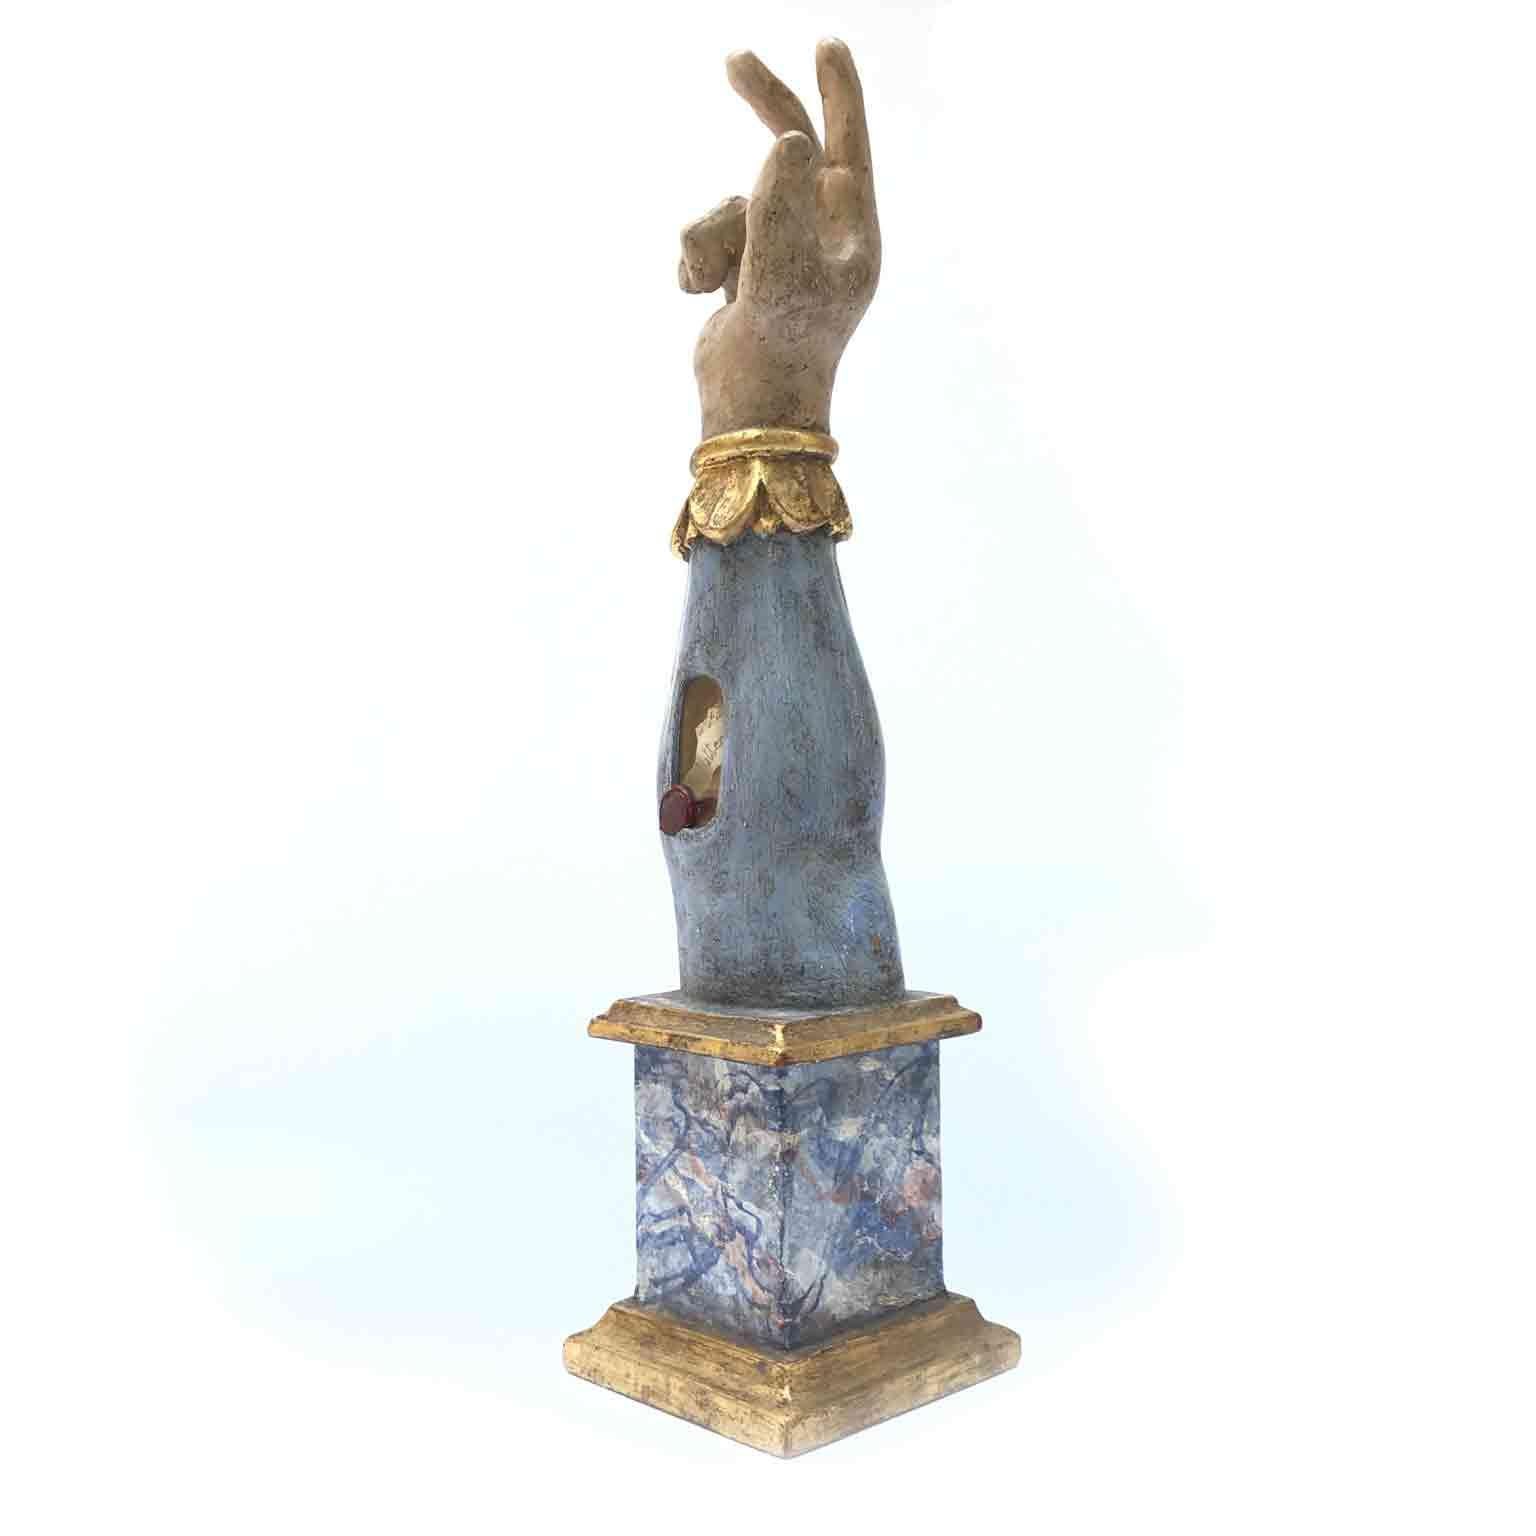 An unusual Italian arm reliquary of Saint Mathiew from Umbria, Central Italy, it is a carved wooden reliquary made in the shape of an arm and realized in the 18th century. The hand holds the thumb, first and second finger extended towards the